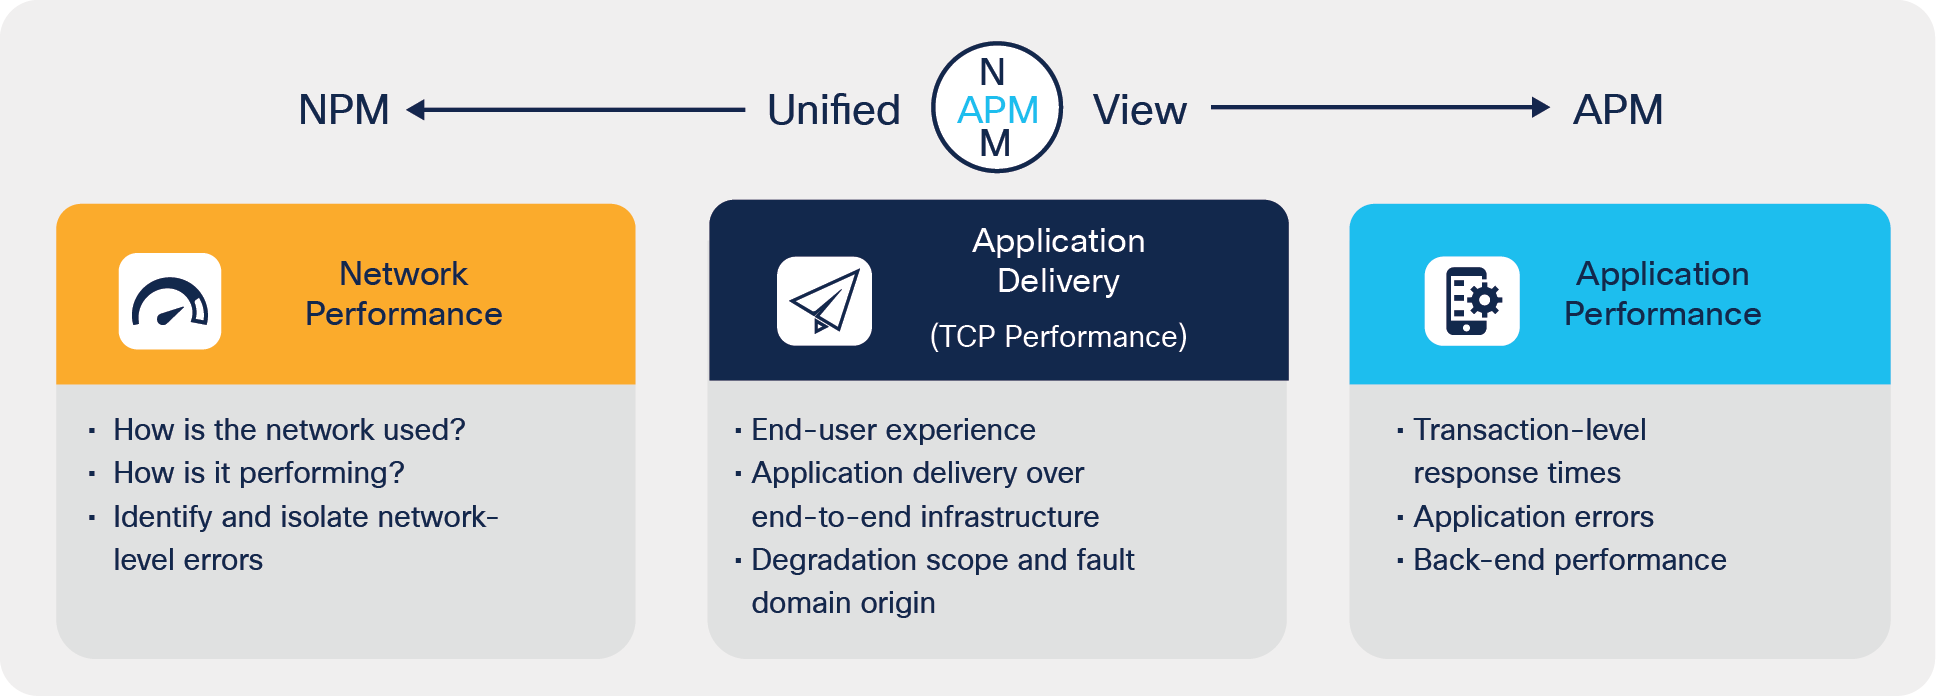 Skylight provides unified application and network performance management